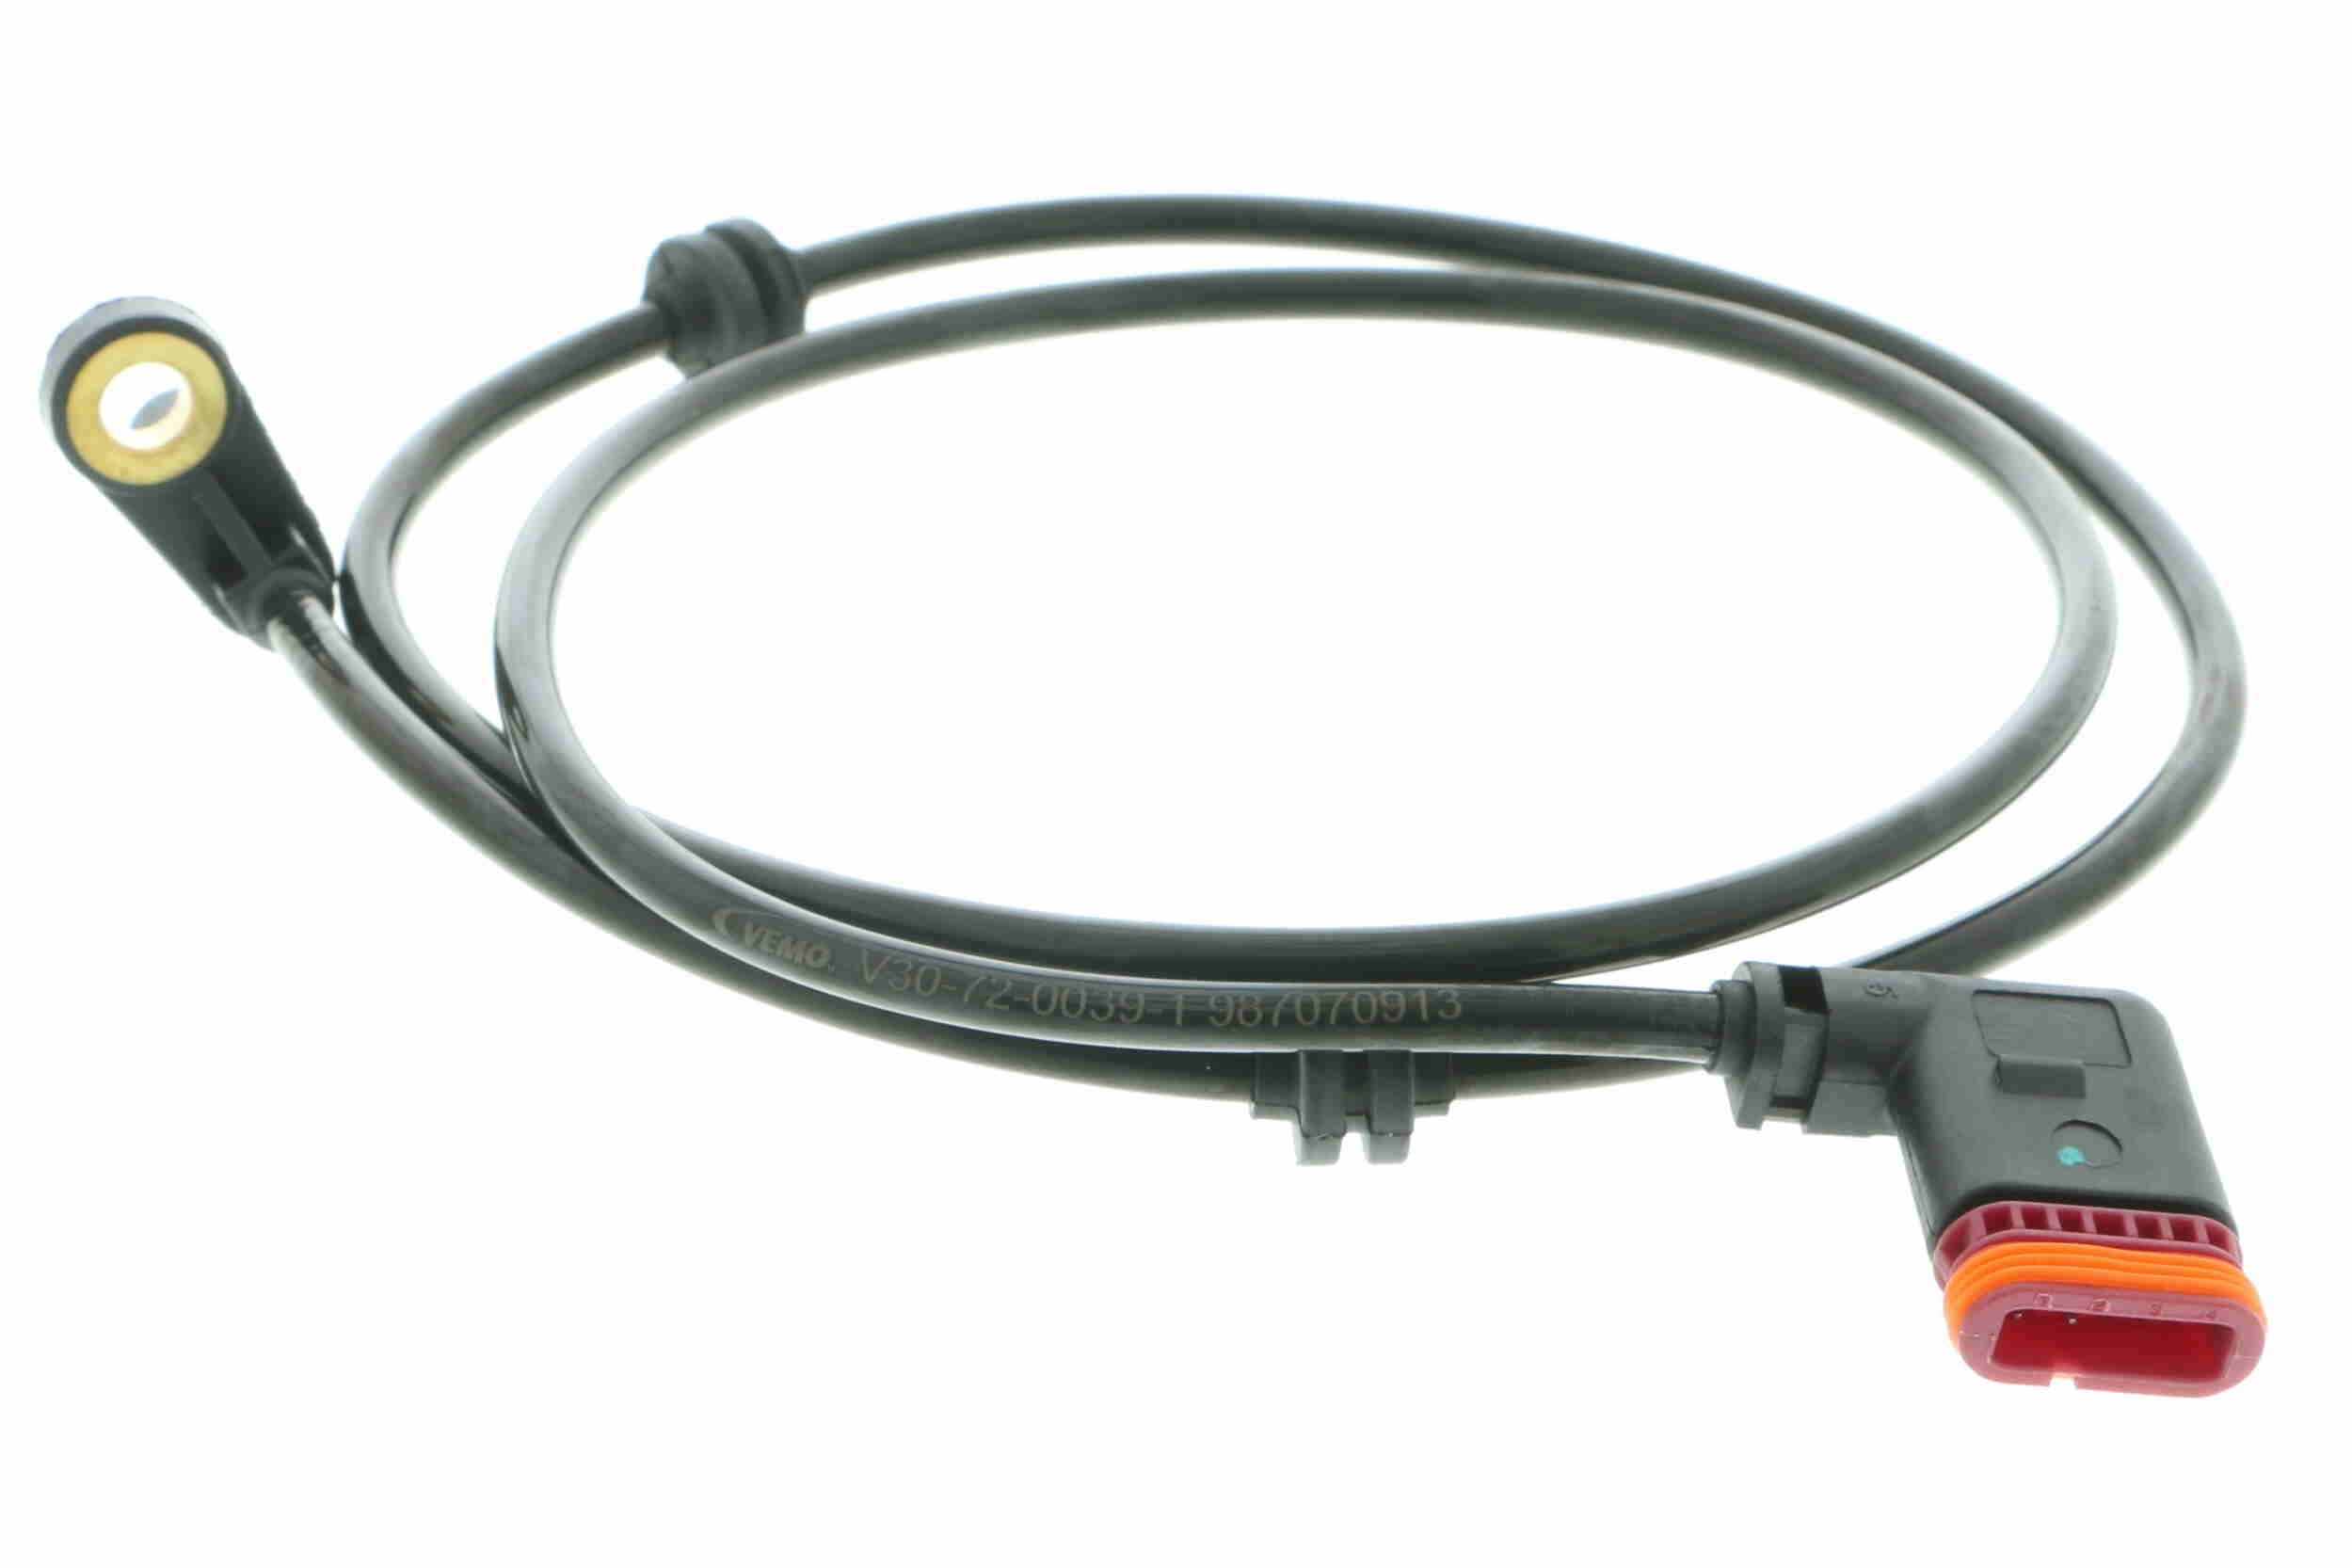 VEMO V30-72-0039-1 ABS sensor Rear Axle, Original VEMO Quality, for vehicles with ABS, 995mm, 12V